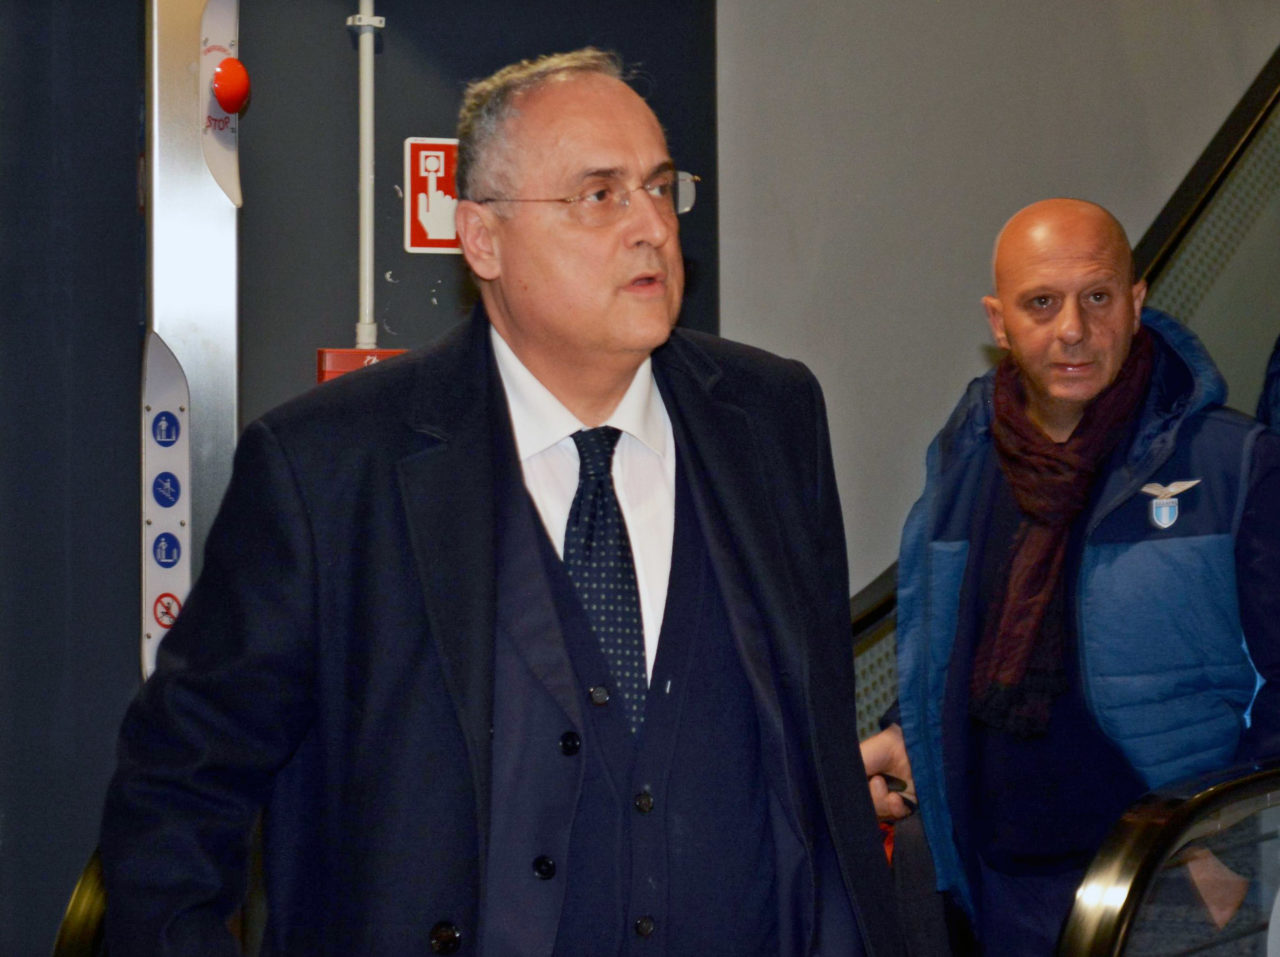 epa08087717 SS Lazio owner and president Claudio Lotito arrives at Fiumicino airport, near Rome, Italy, 23 December 2019, as the team arrived back home after winning the Supercoppa Italiana 2109 against Juventus, which was played in Riyadh, Saudi Arabia. Lazio won 3-1. EPA-EFE/TELENEWS